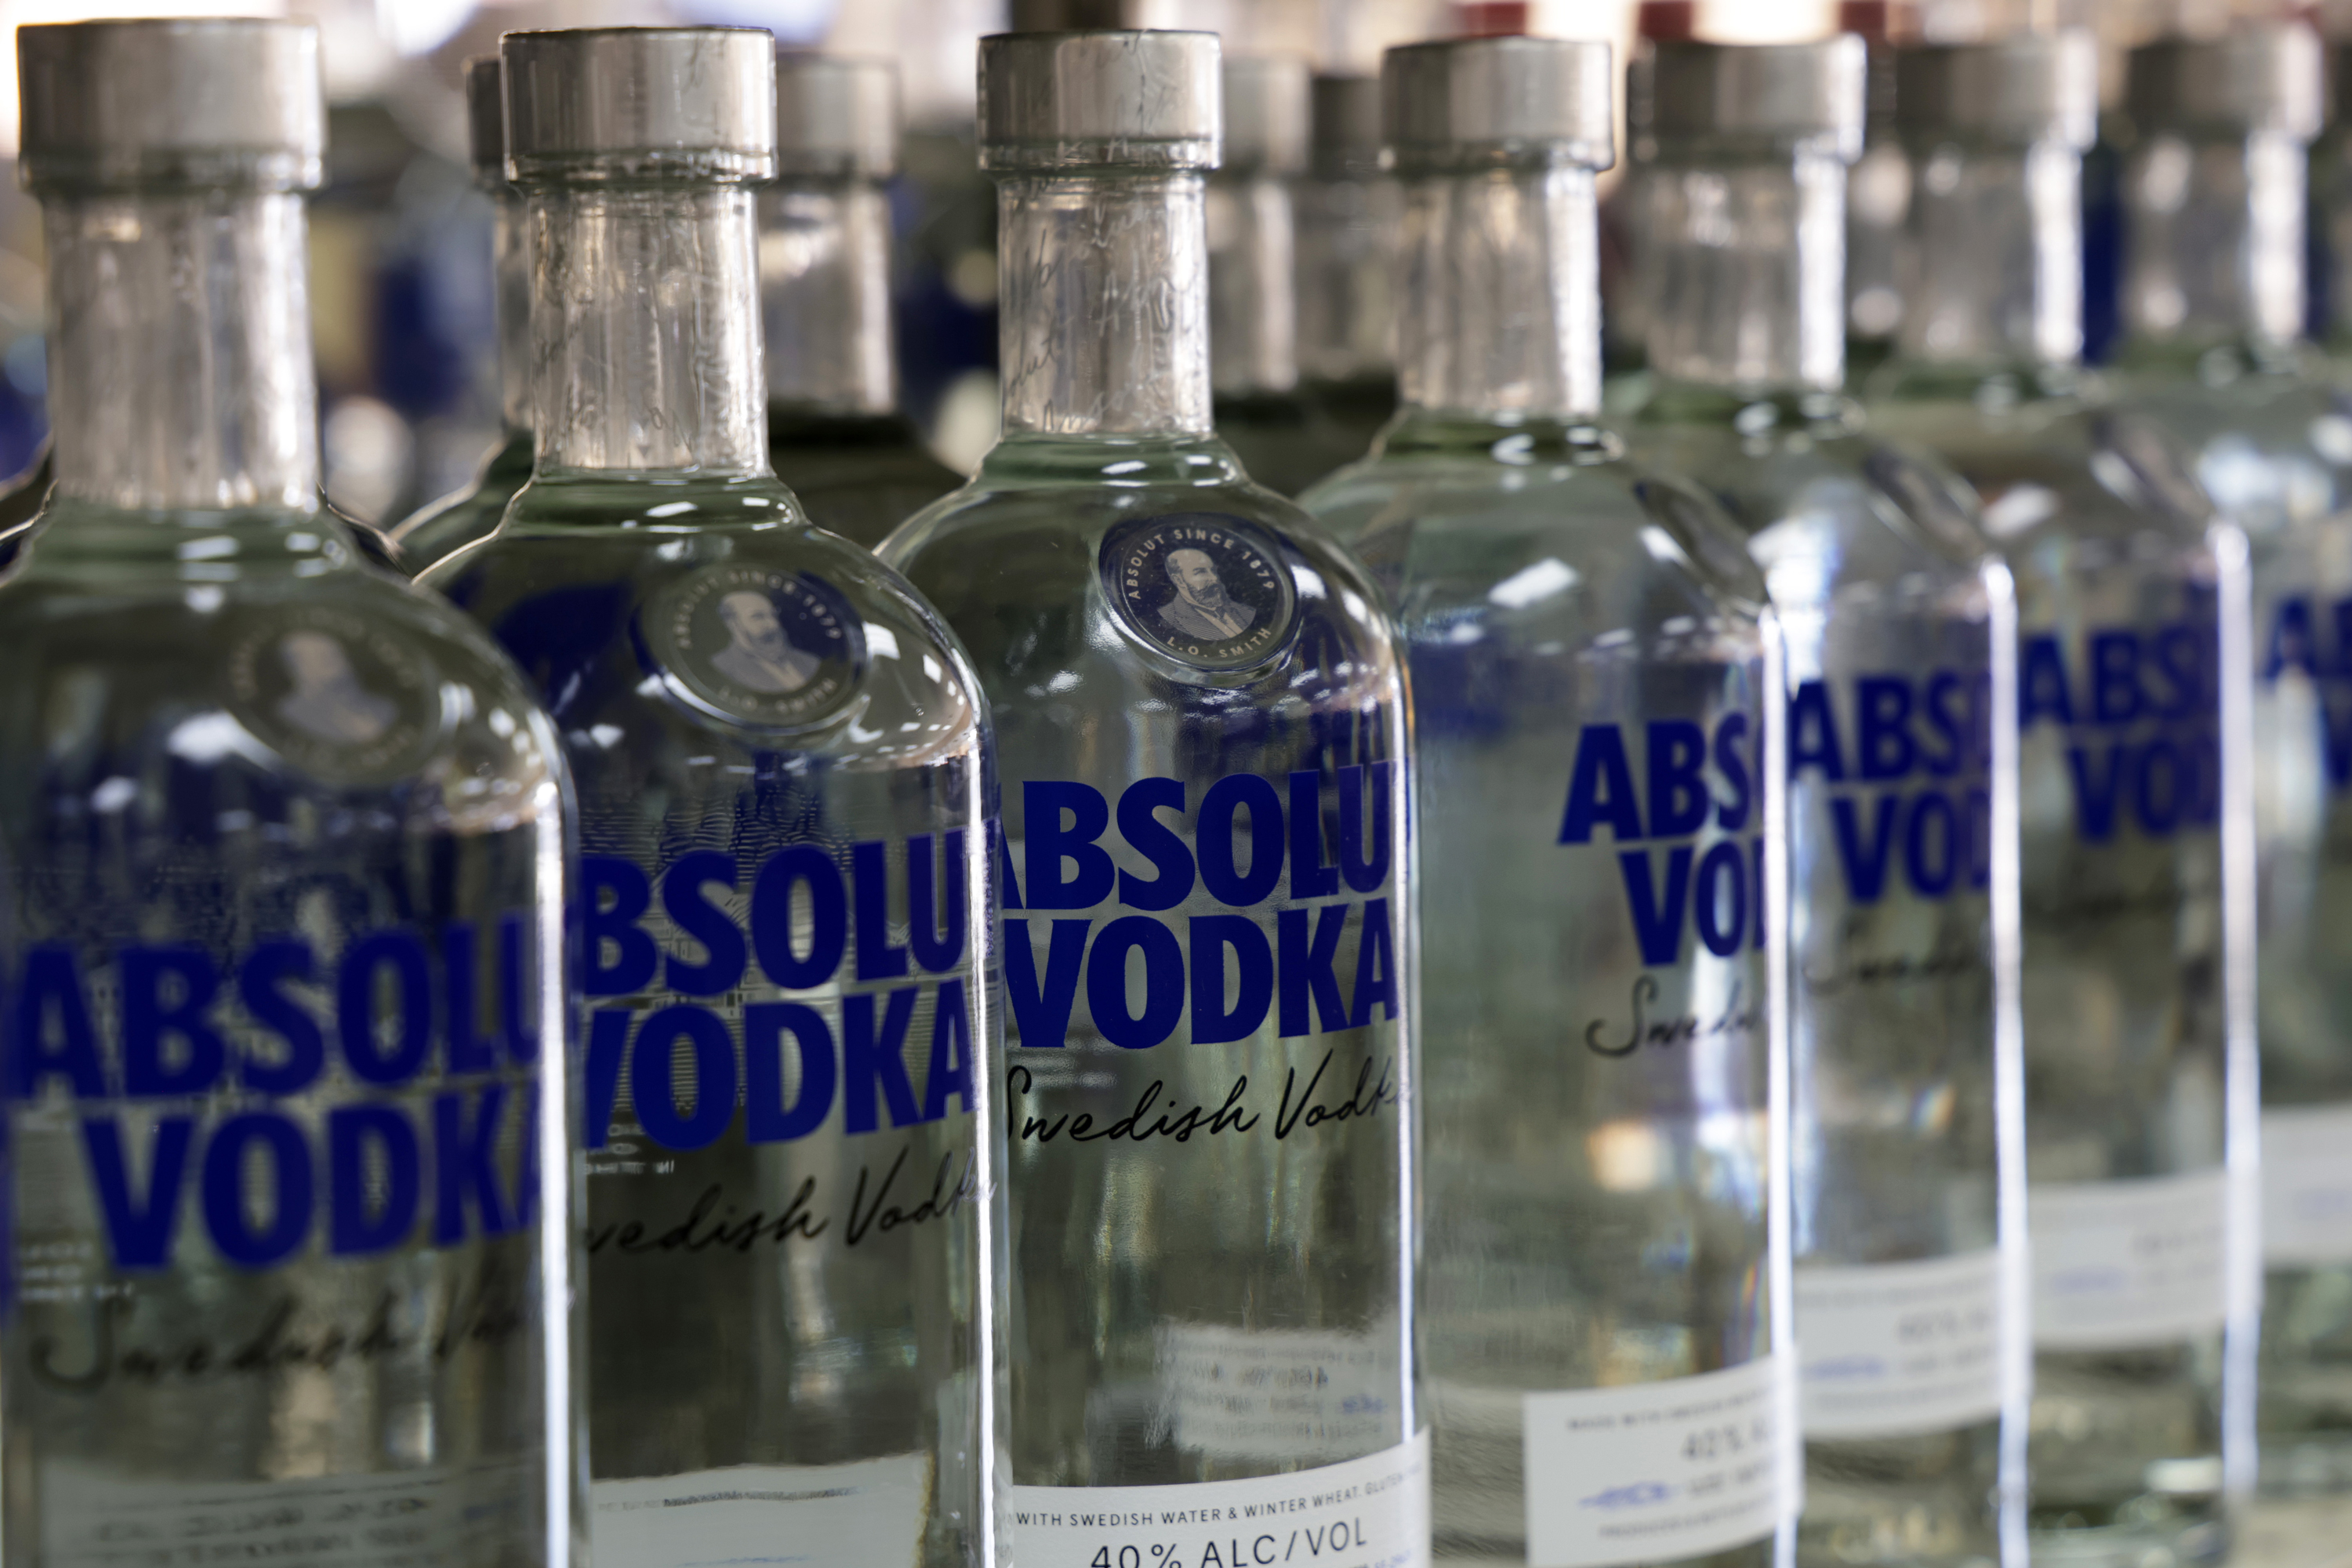 Bottles of Absolut Vodka are seen on a shelf in an ABC store on February 28, 2022 in Alexandria, Virginia.